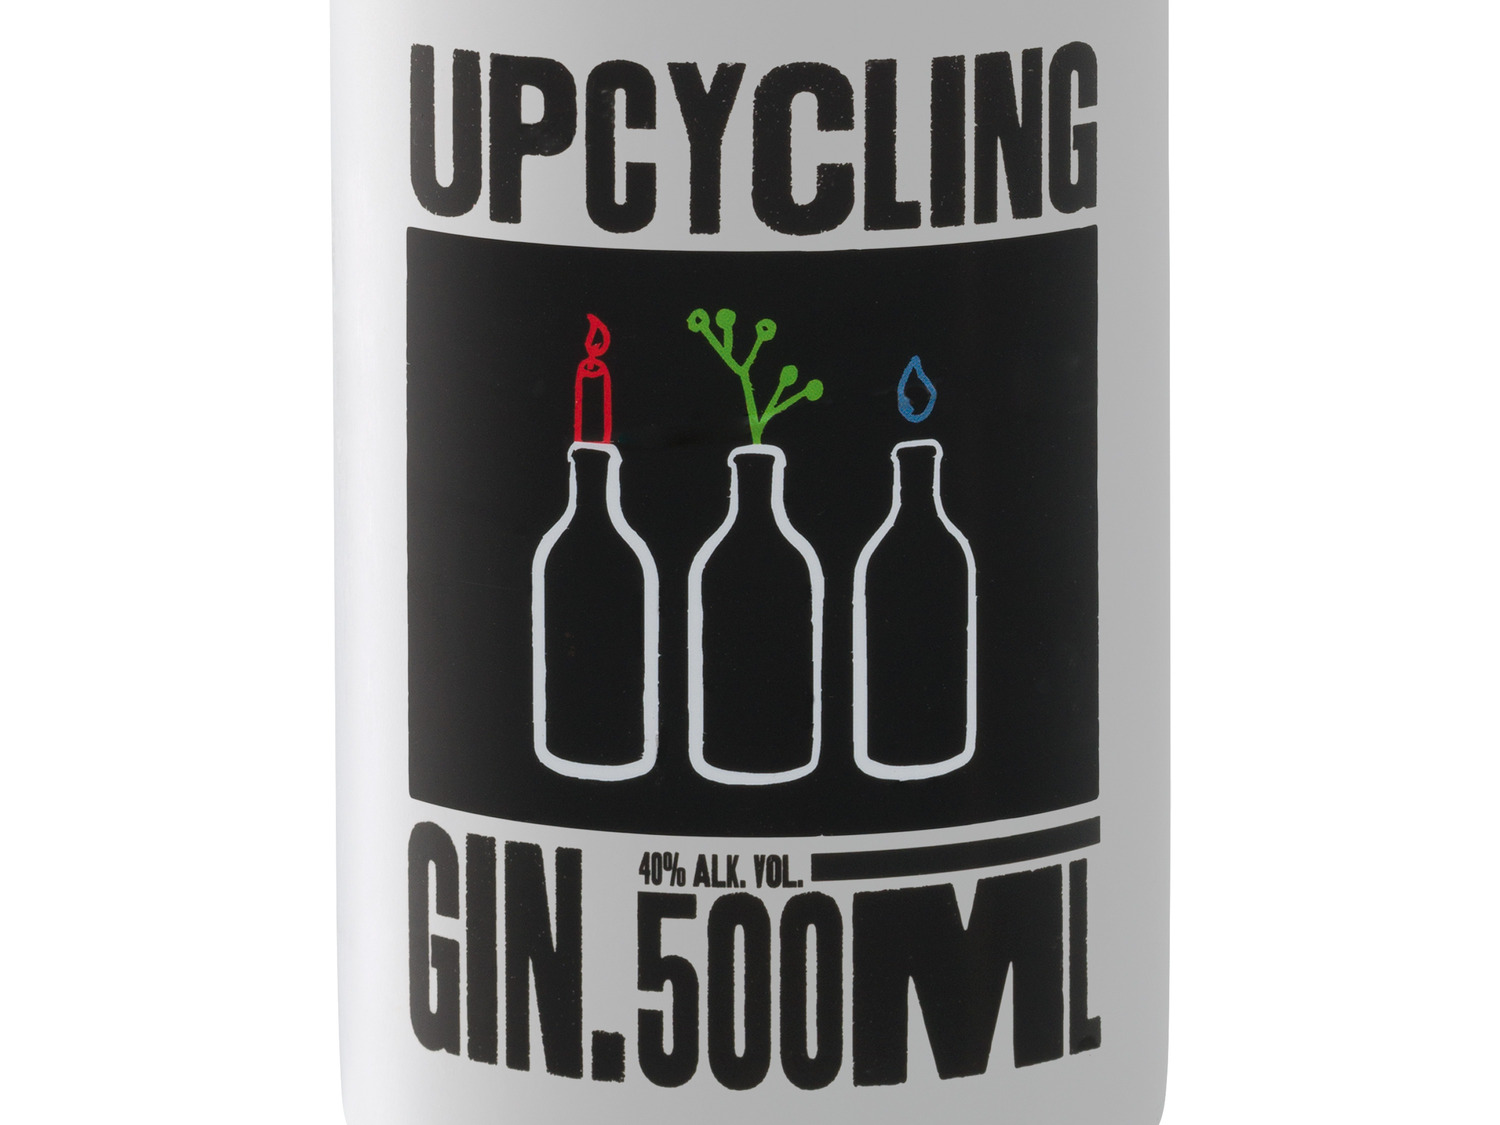 40% LIDL Vol Gin Upcycling kaufen | online